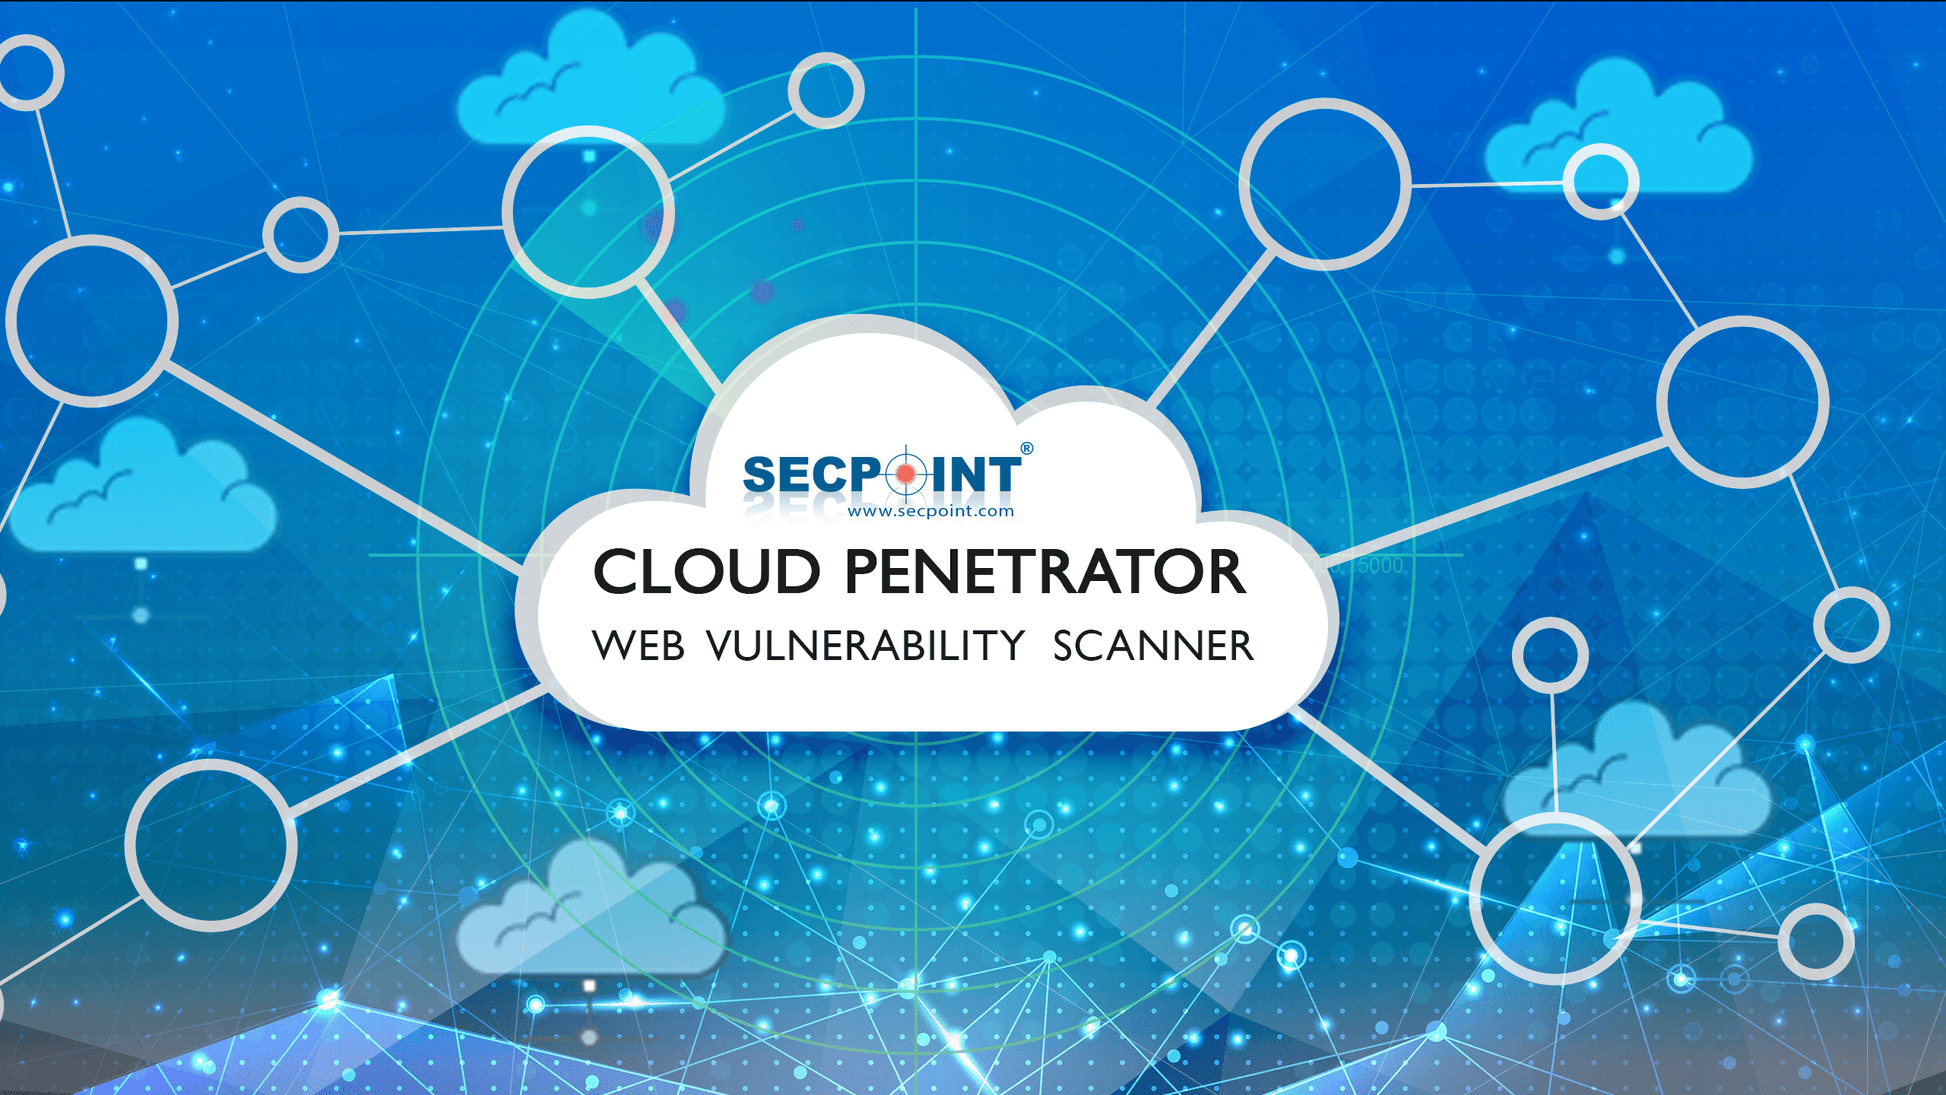 SecPoint Cloud Penetrator S9 - Vulnerability Scanning of 512 IPs  for 3 Years Static Scan License - SecPoint